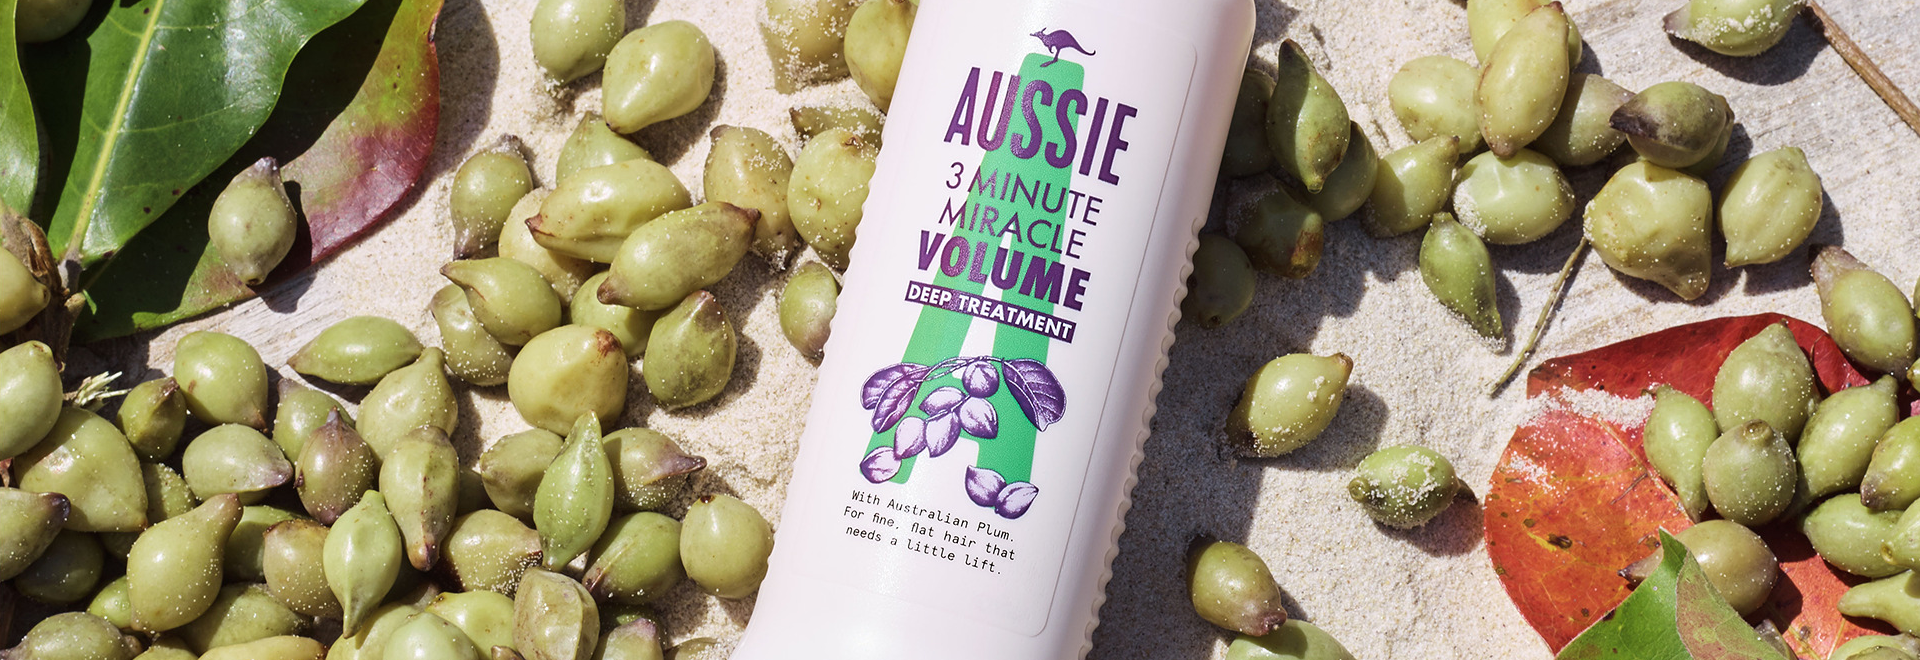 An Aussie Shampoo bottle surrounded by kakadu plums on the sand 